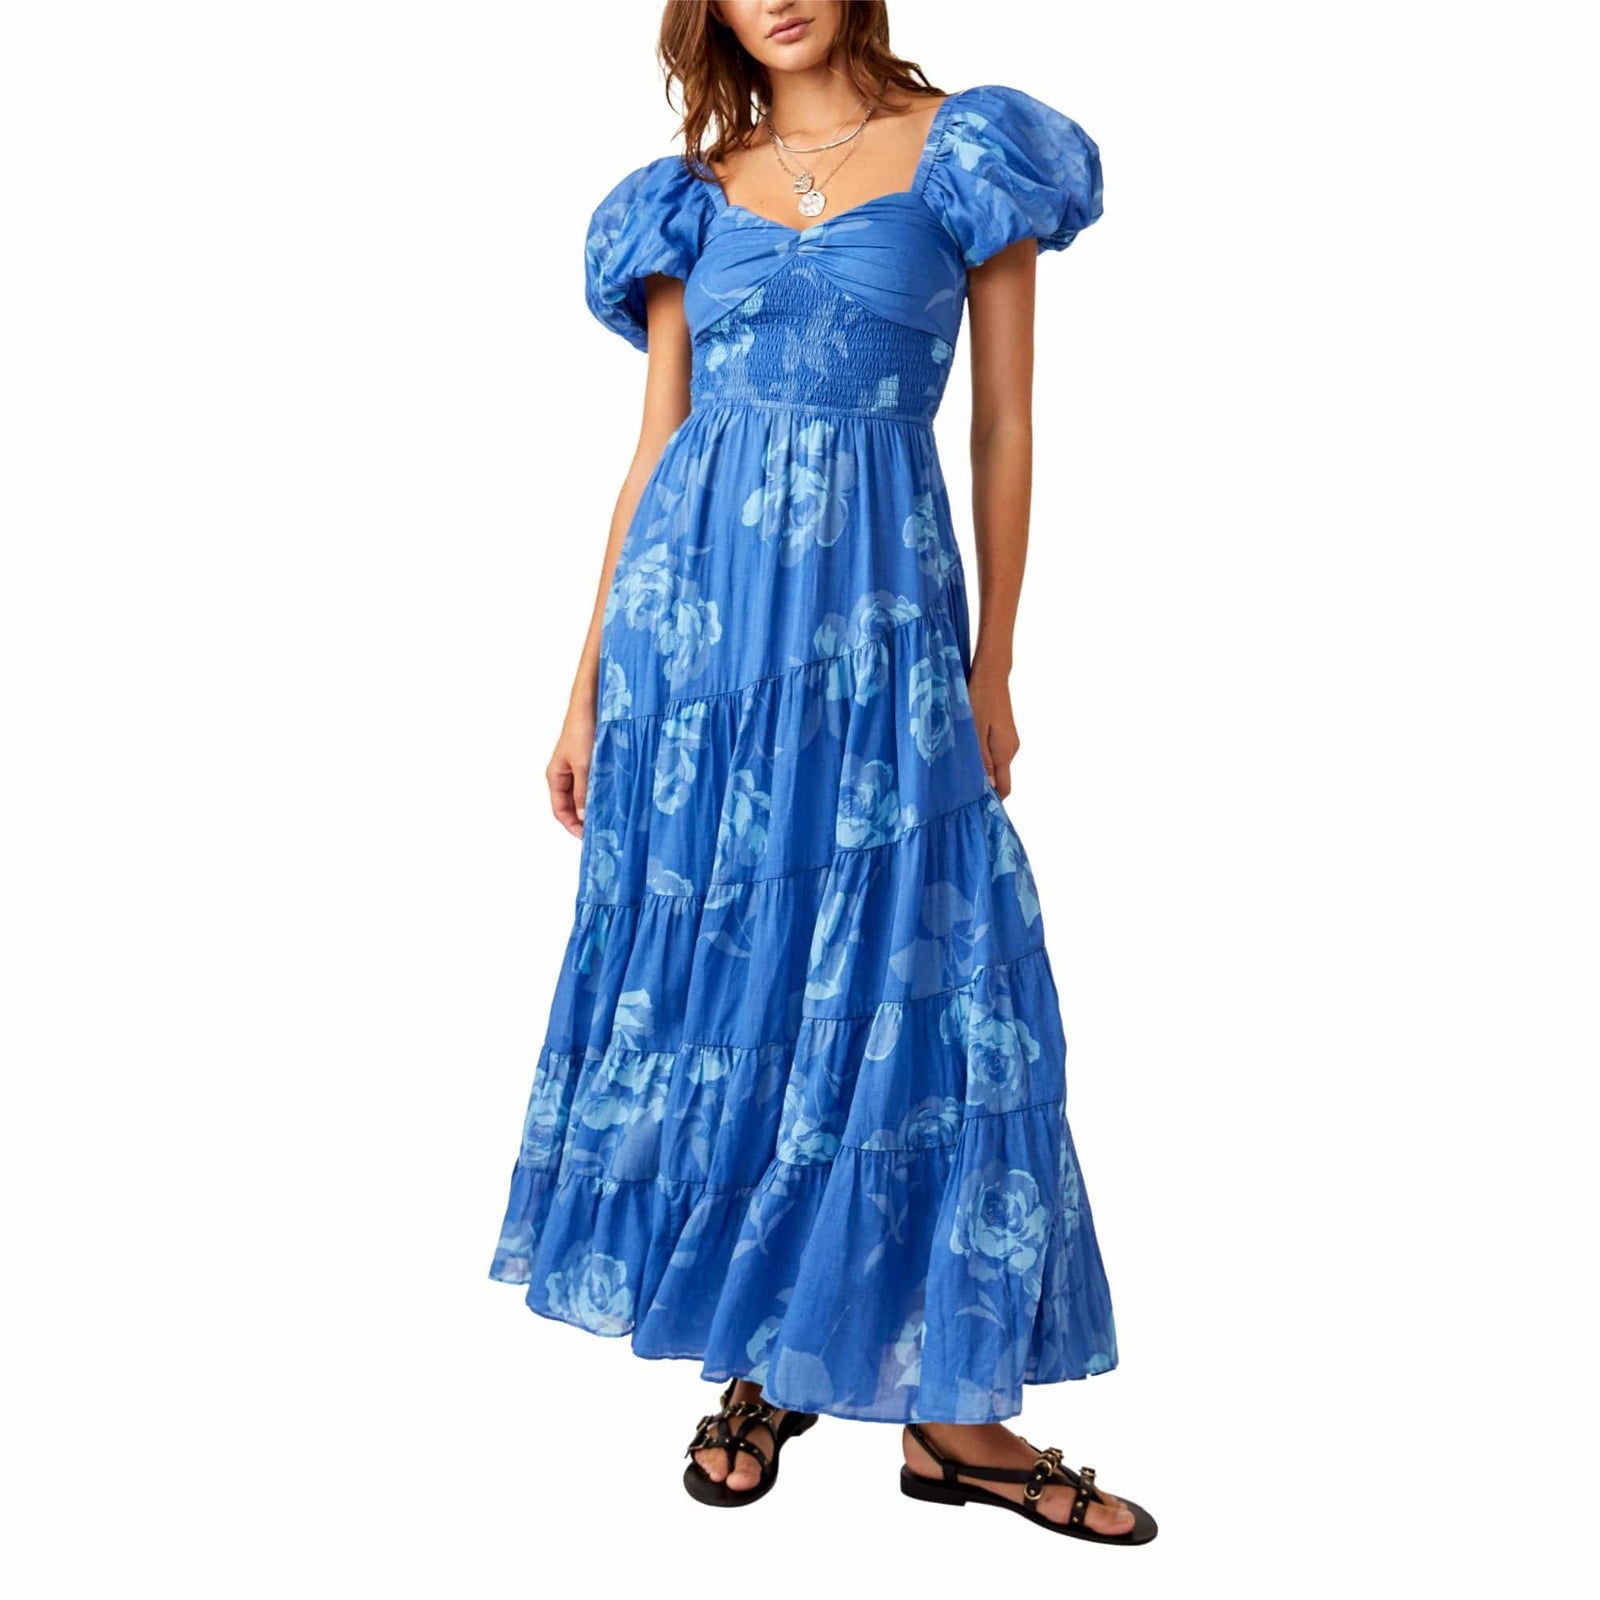 Free People Sundrenched Short-Sleeve Maxi Dress